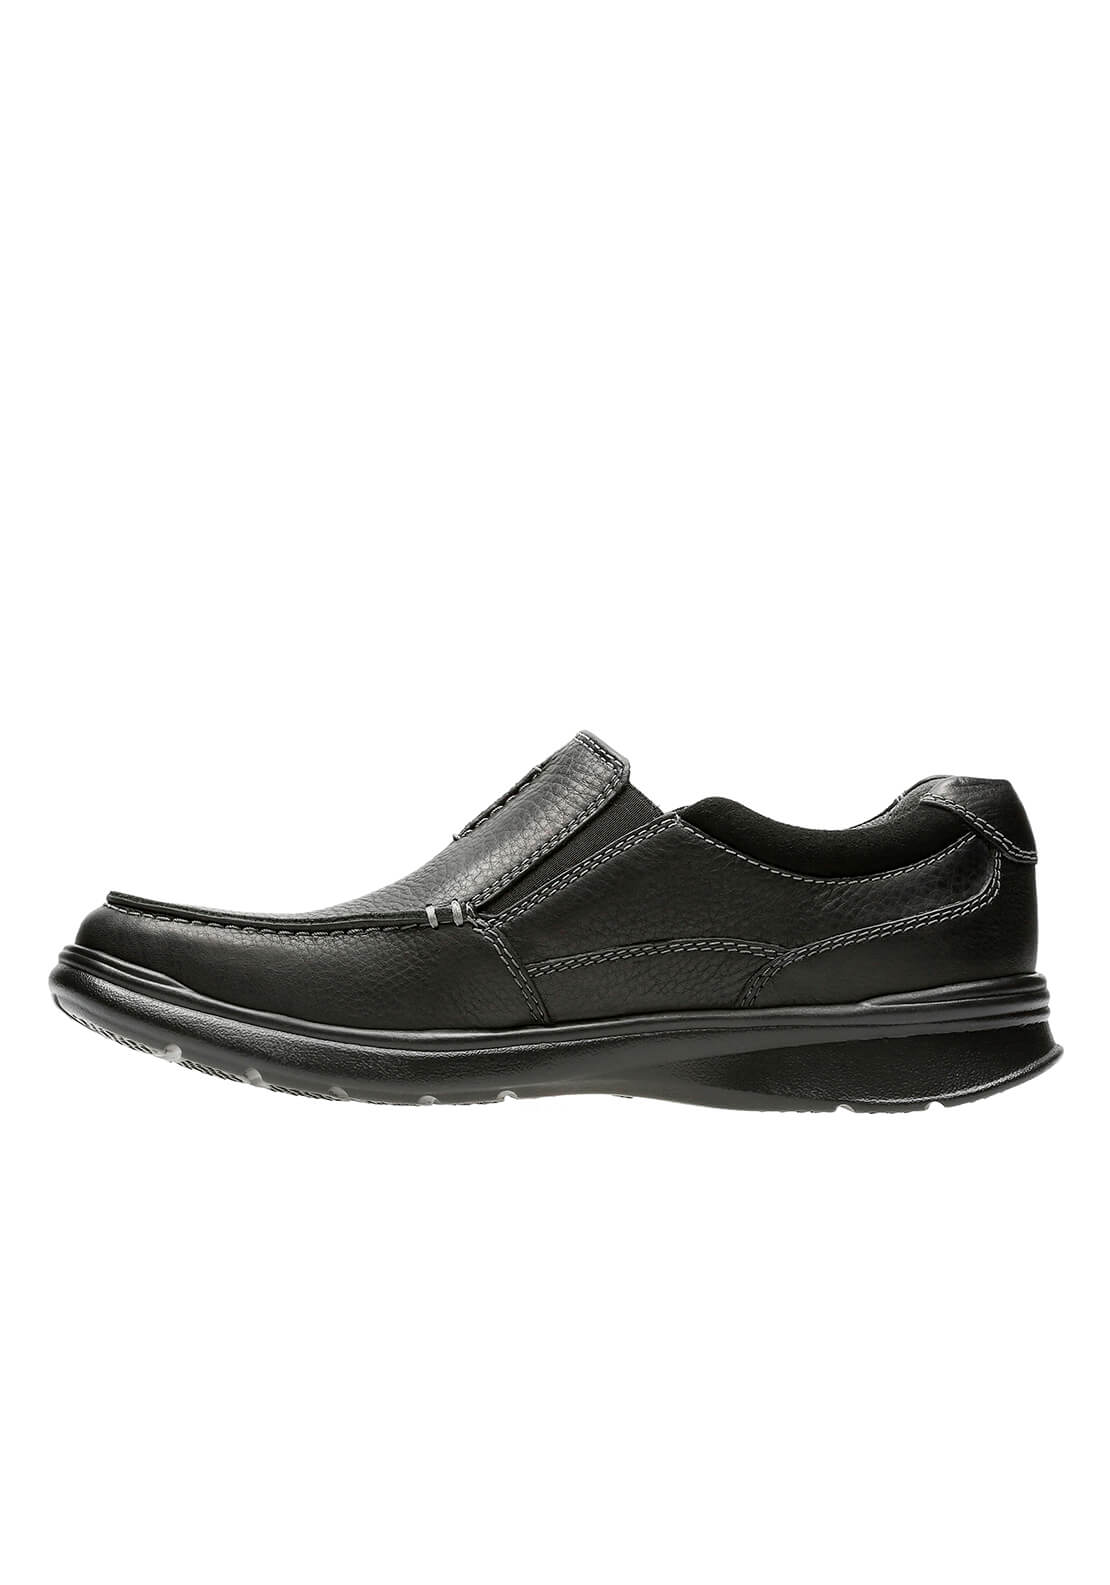 Clarks Cotrell Free Casual Shoe - Black 2 Shaws Department Stores